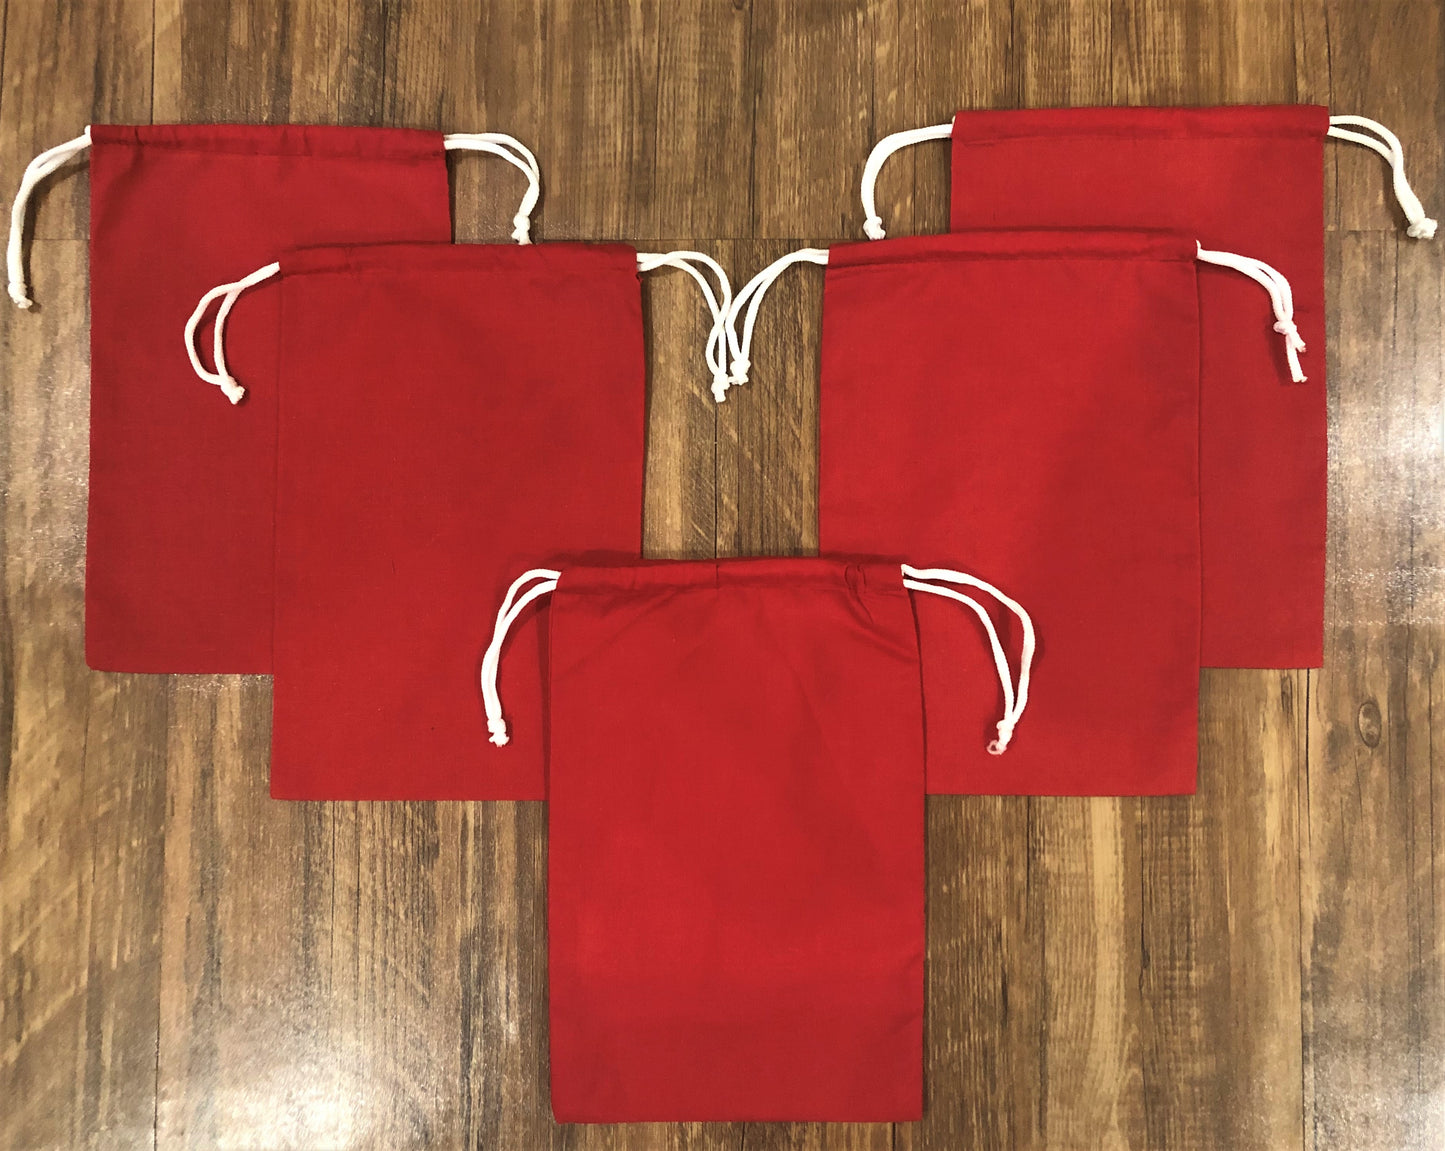 12x20 Inches Reusable Eco-Friendly Cotton Double Drawstring Bags Red Color